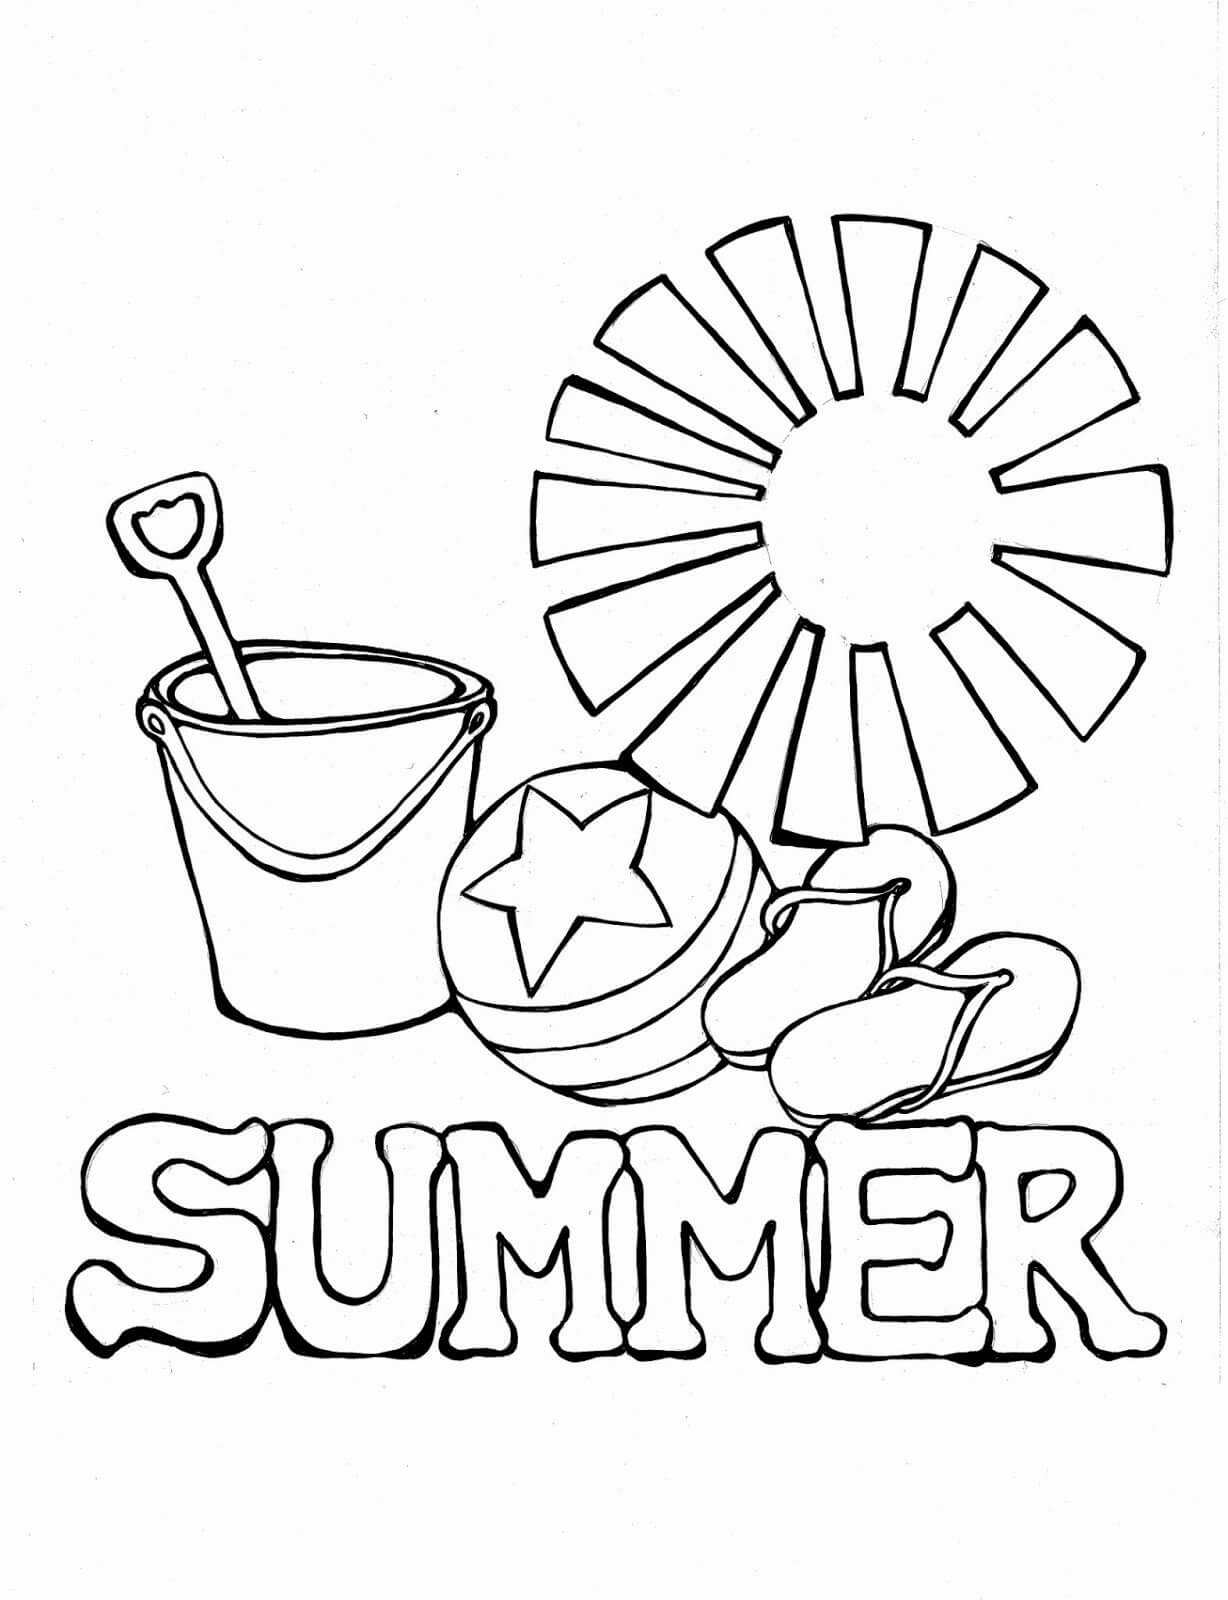 Summer Coloring Pages For Kindergarten At Getdrawings Free Download 